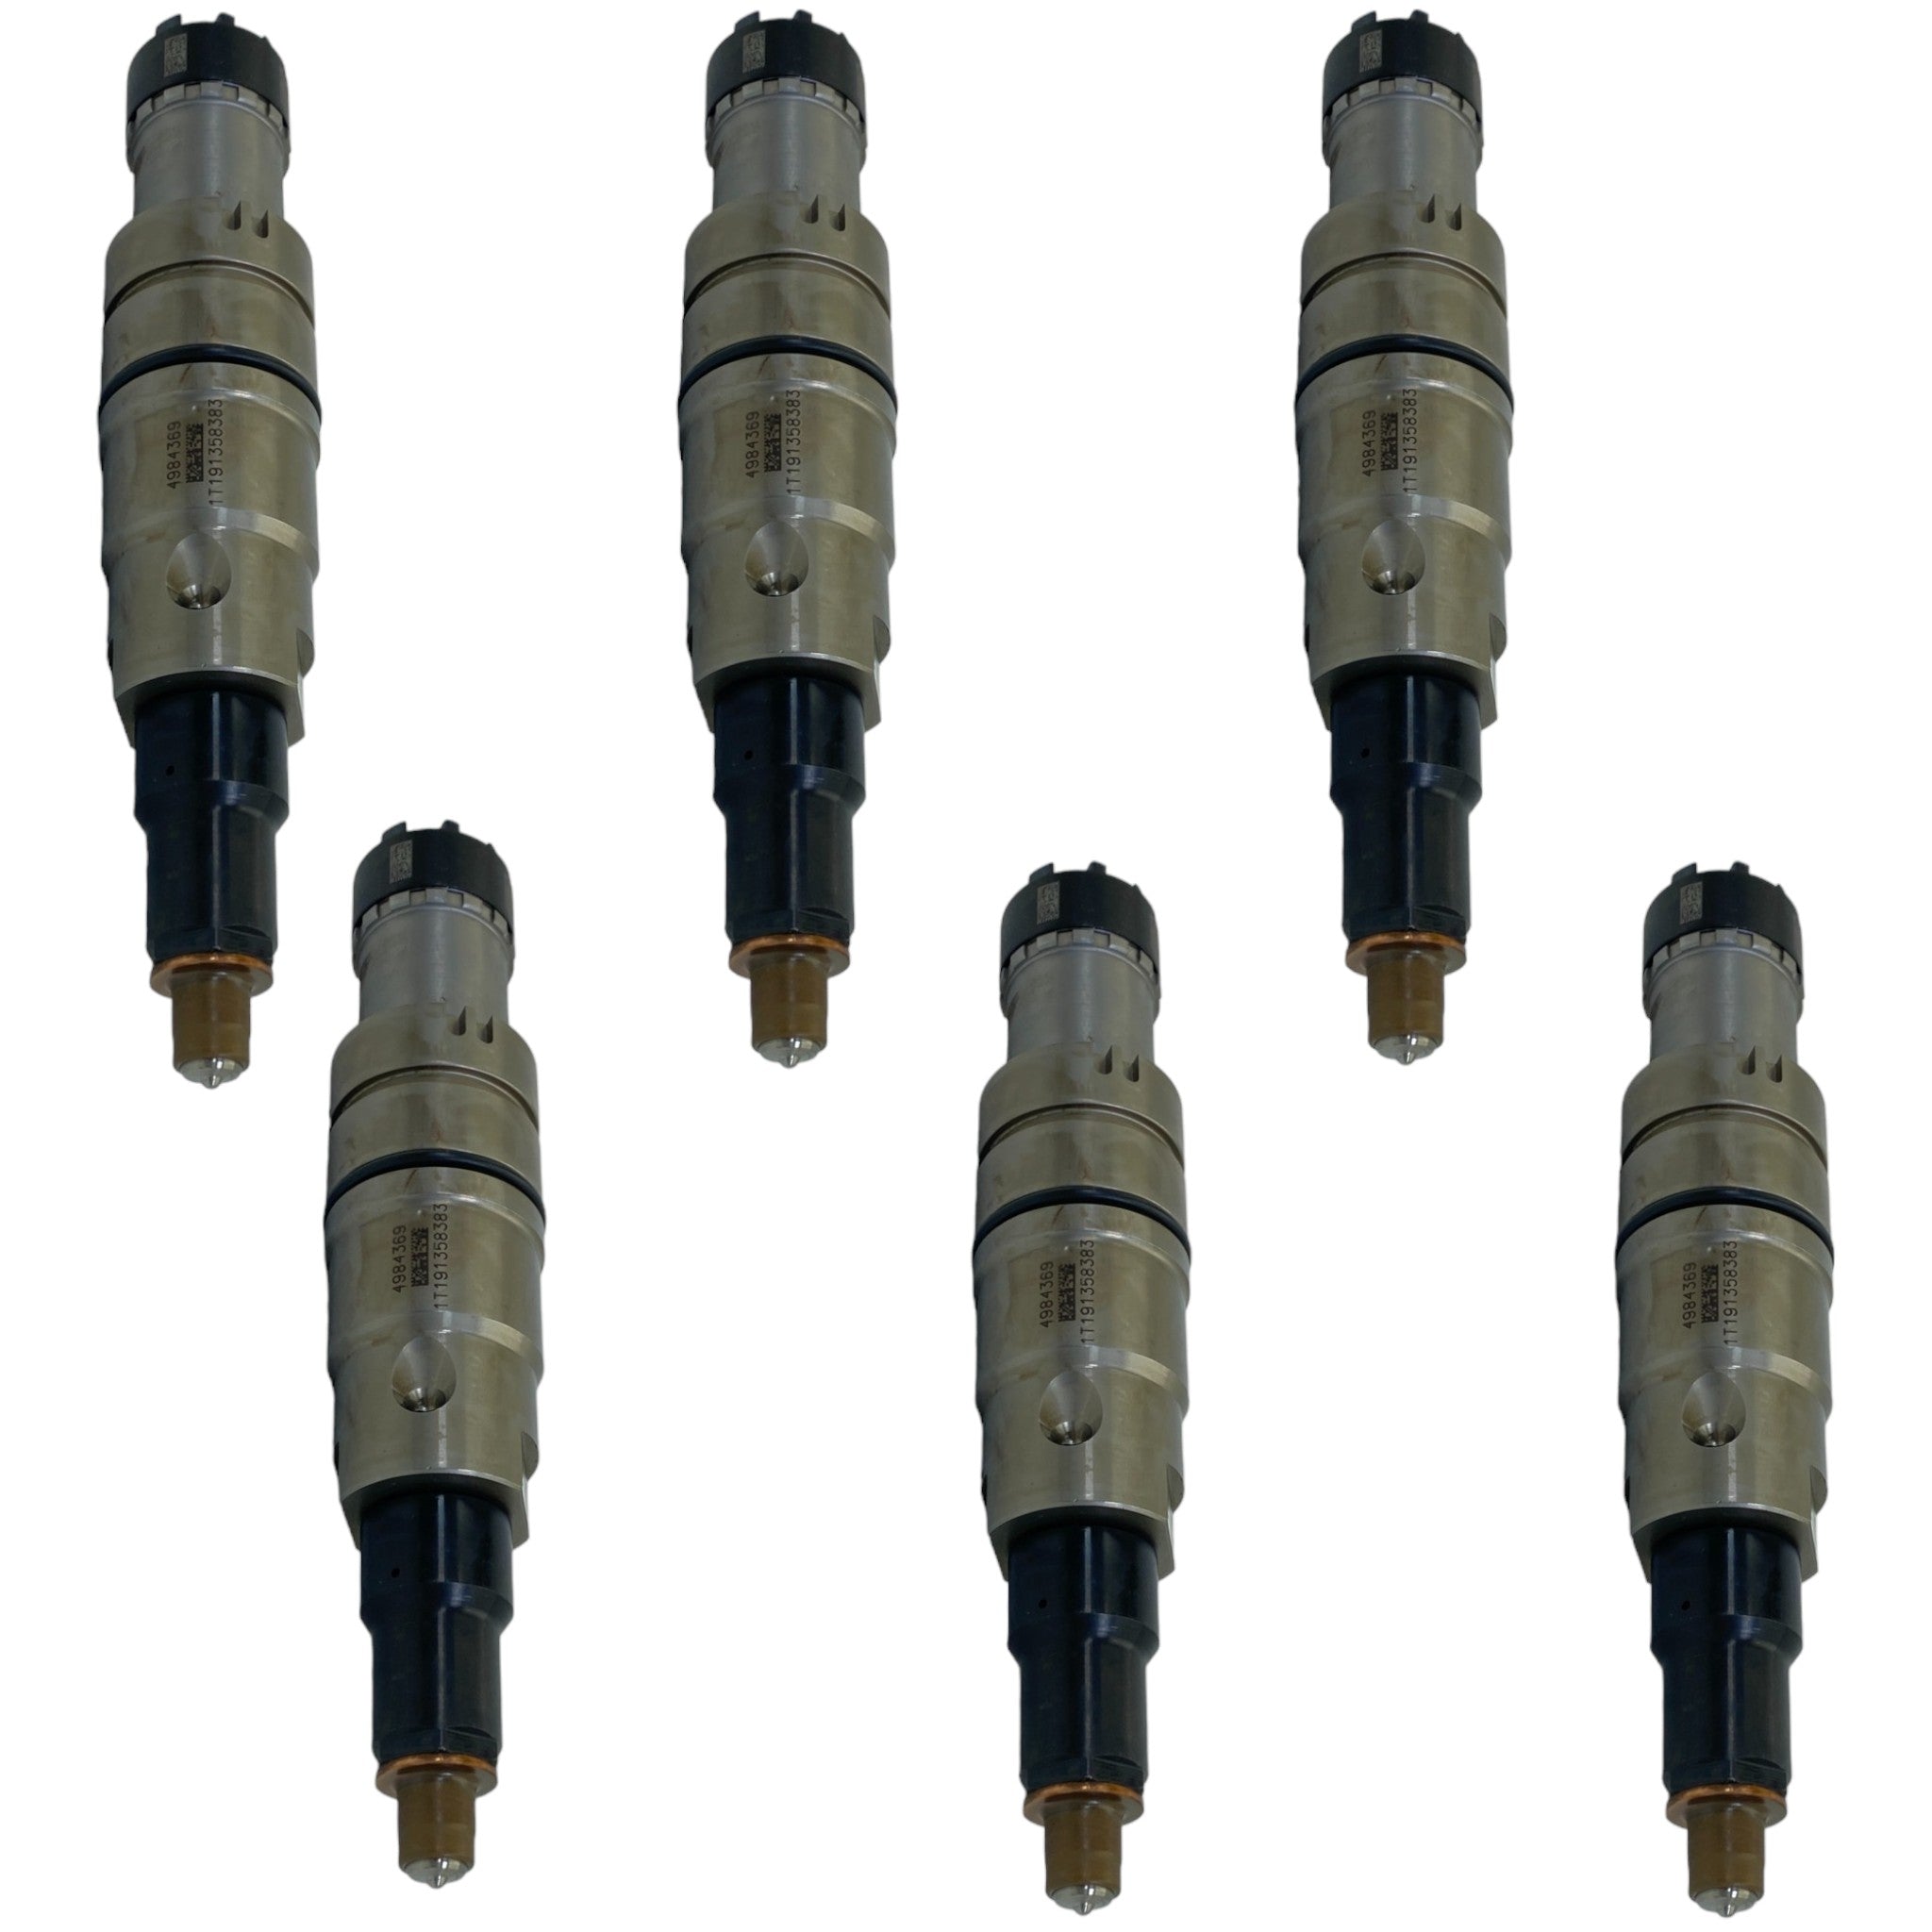 5579419 Genuine Cummins Fuel Injectors Set Of Six For Xpi Fuel Systems On Epa13 15L Isx/Qsx Engines